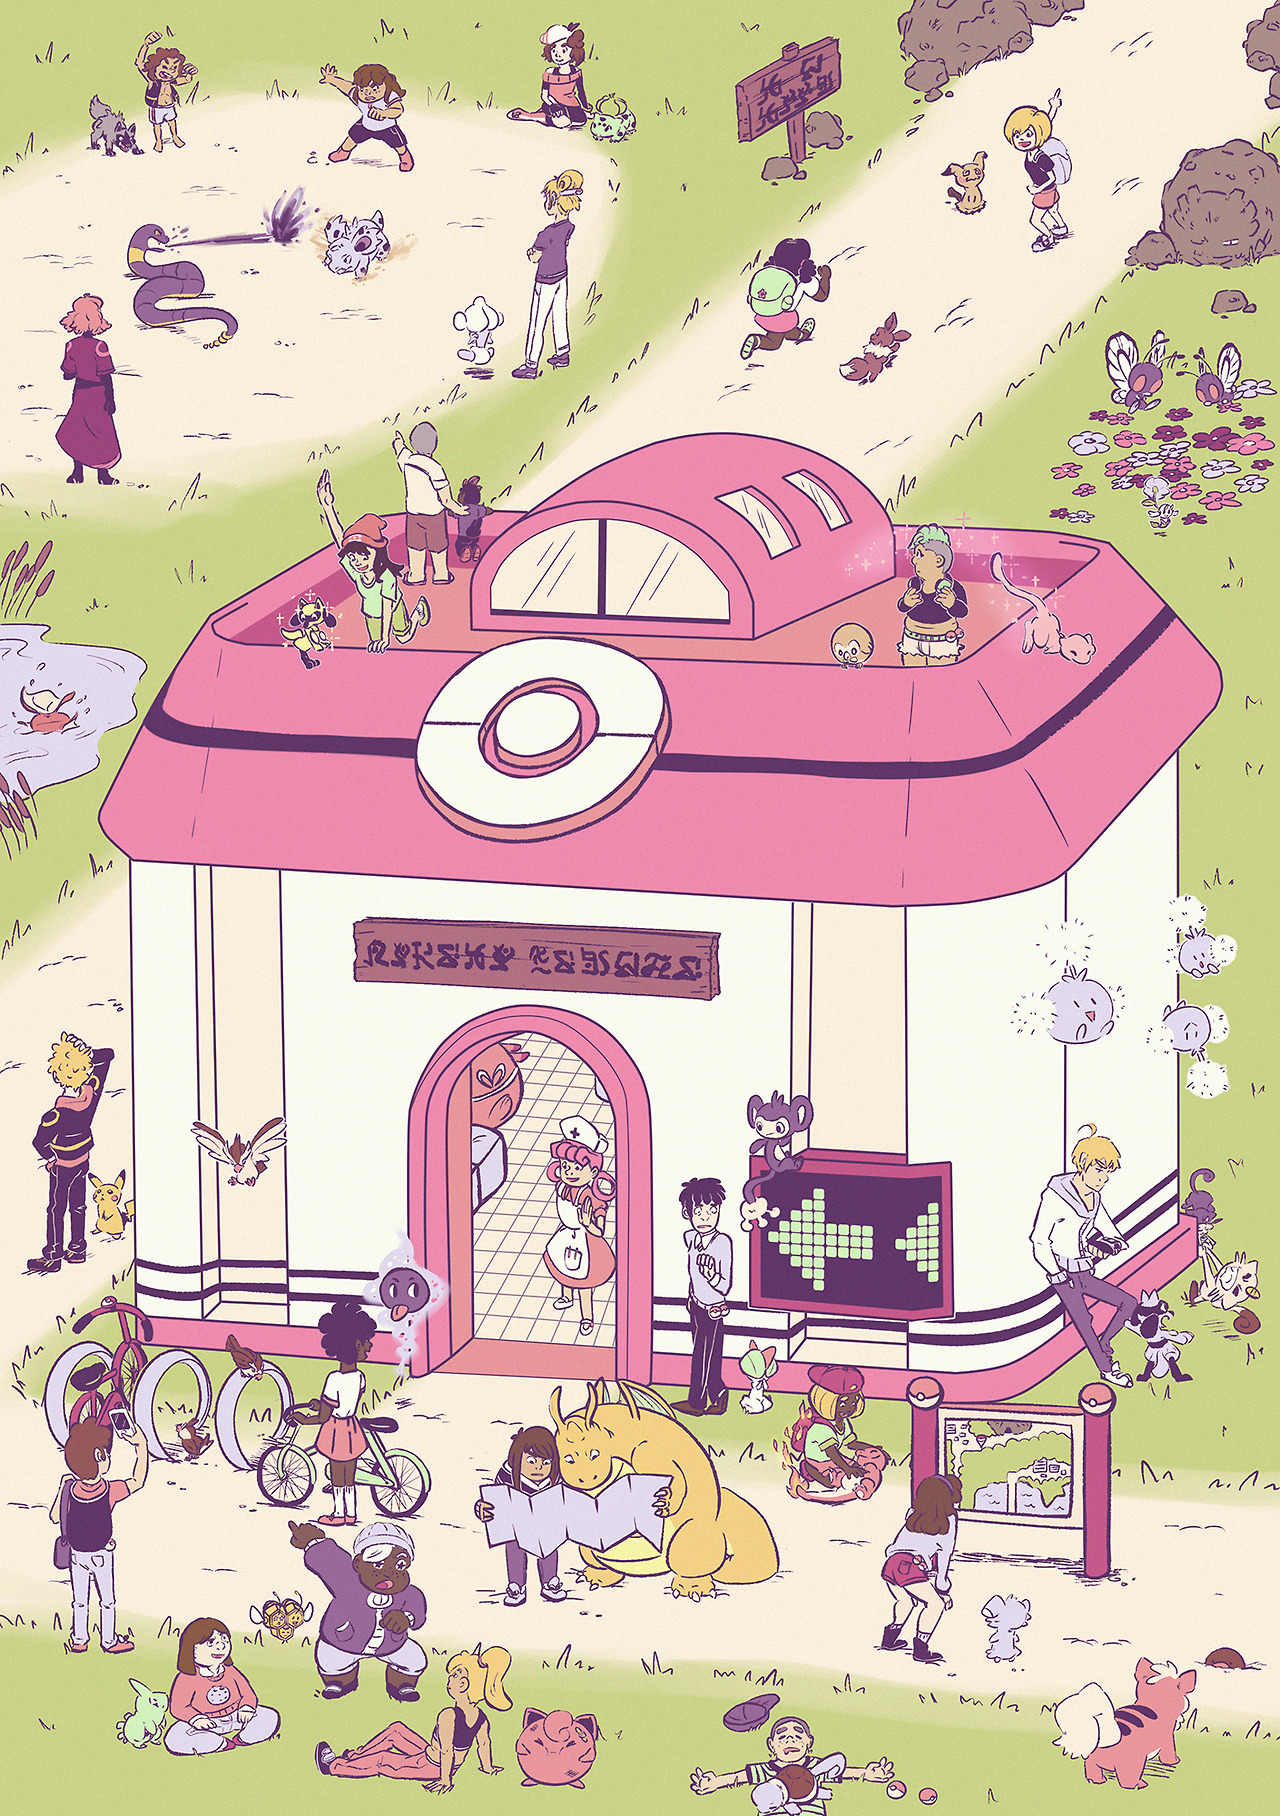 chai-bean: open 24/7!  I always loved the idea of Pokemon Centres as a central hub